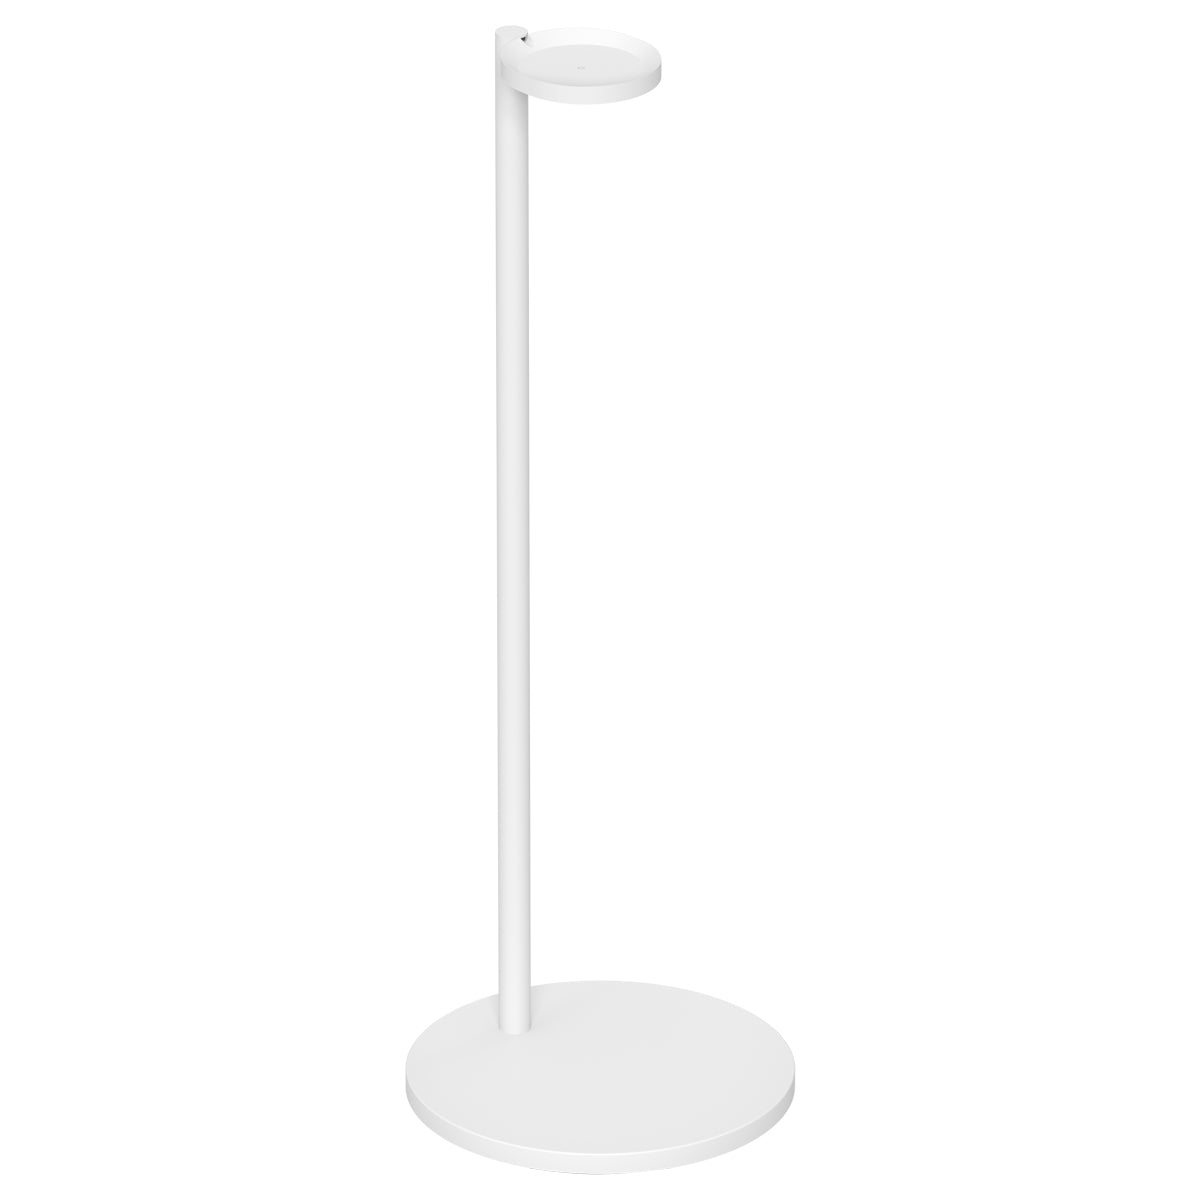 Sonos STAND for ERA 100 - White - The Audio Experts